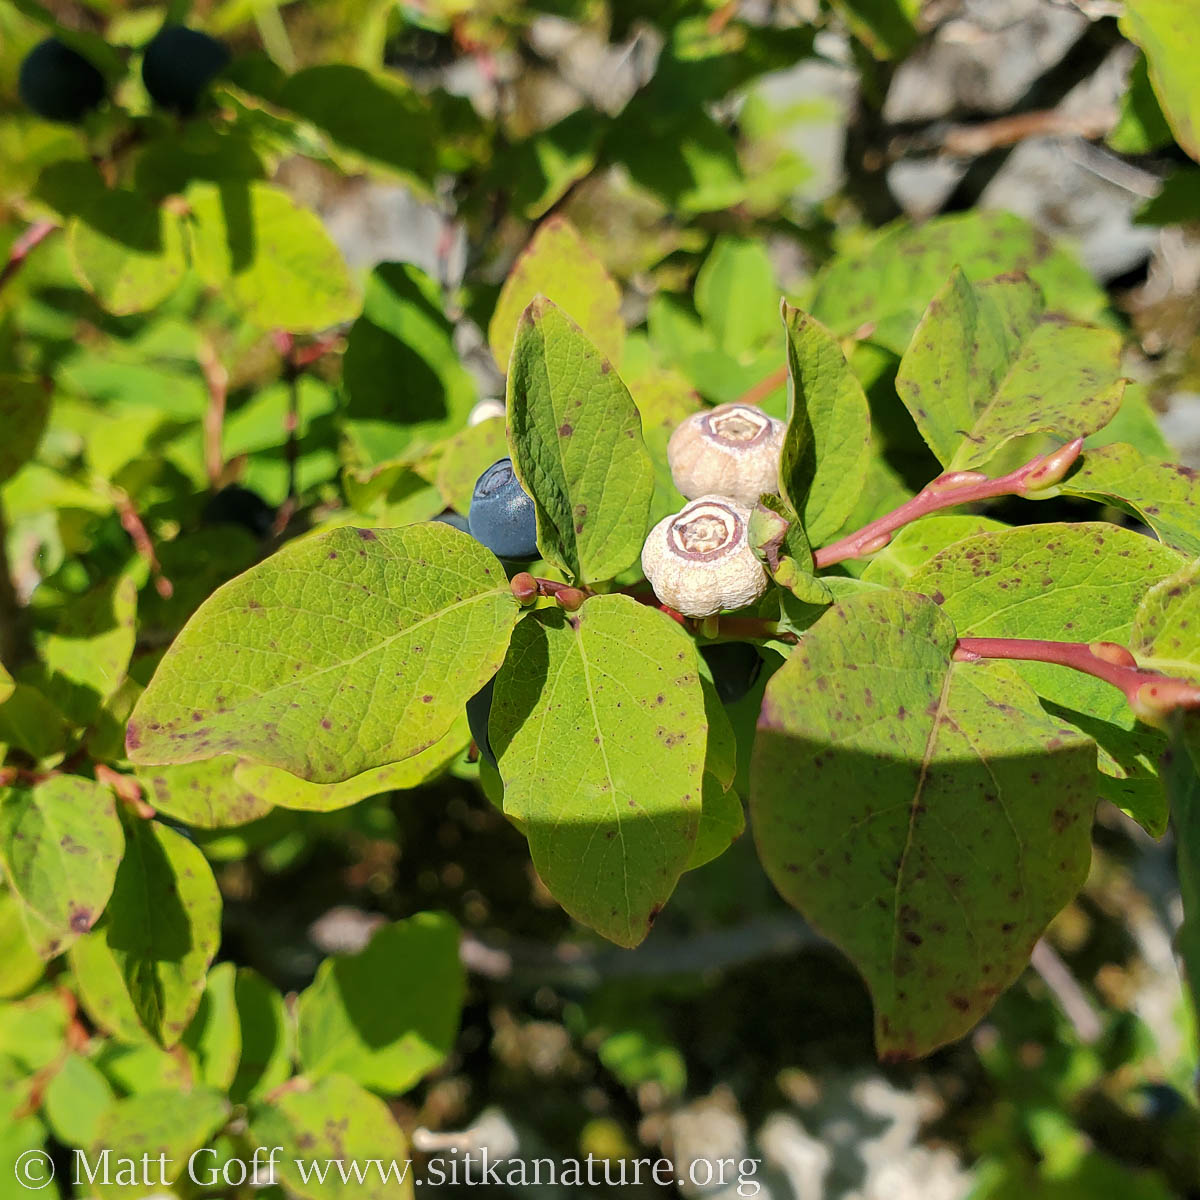 photo of developing blueberries along with one infected by Monilinia